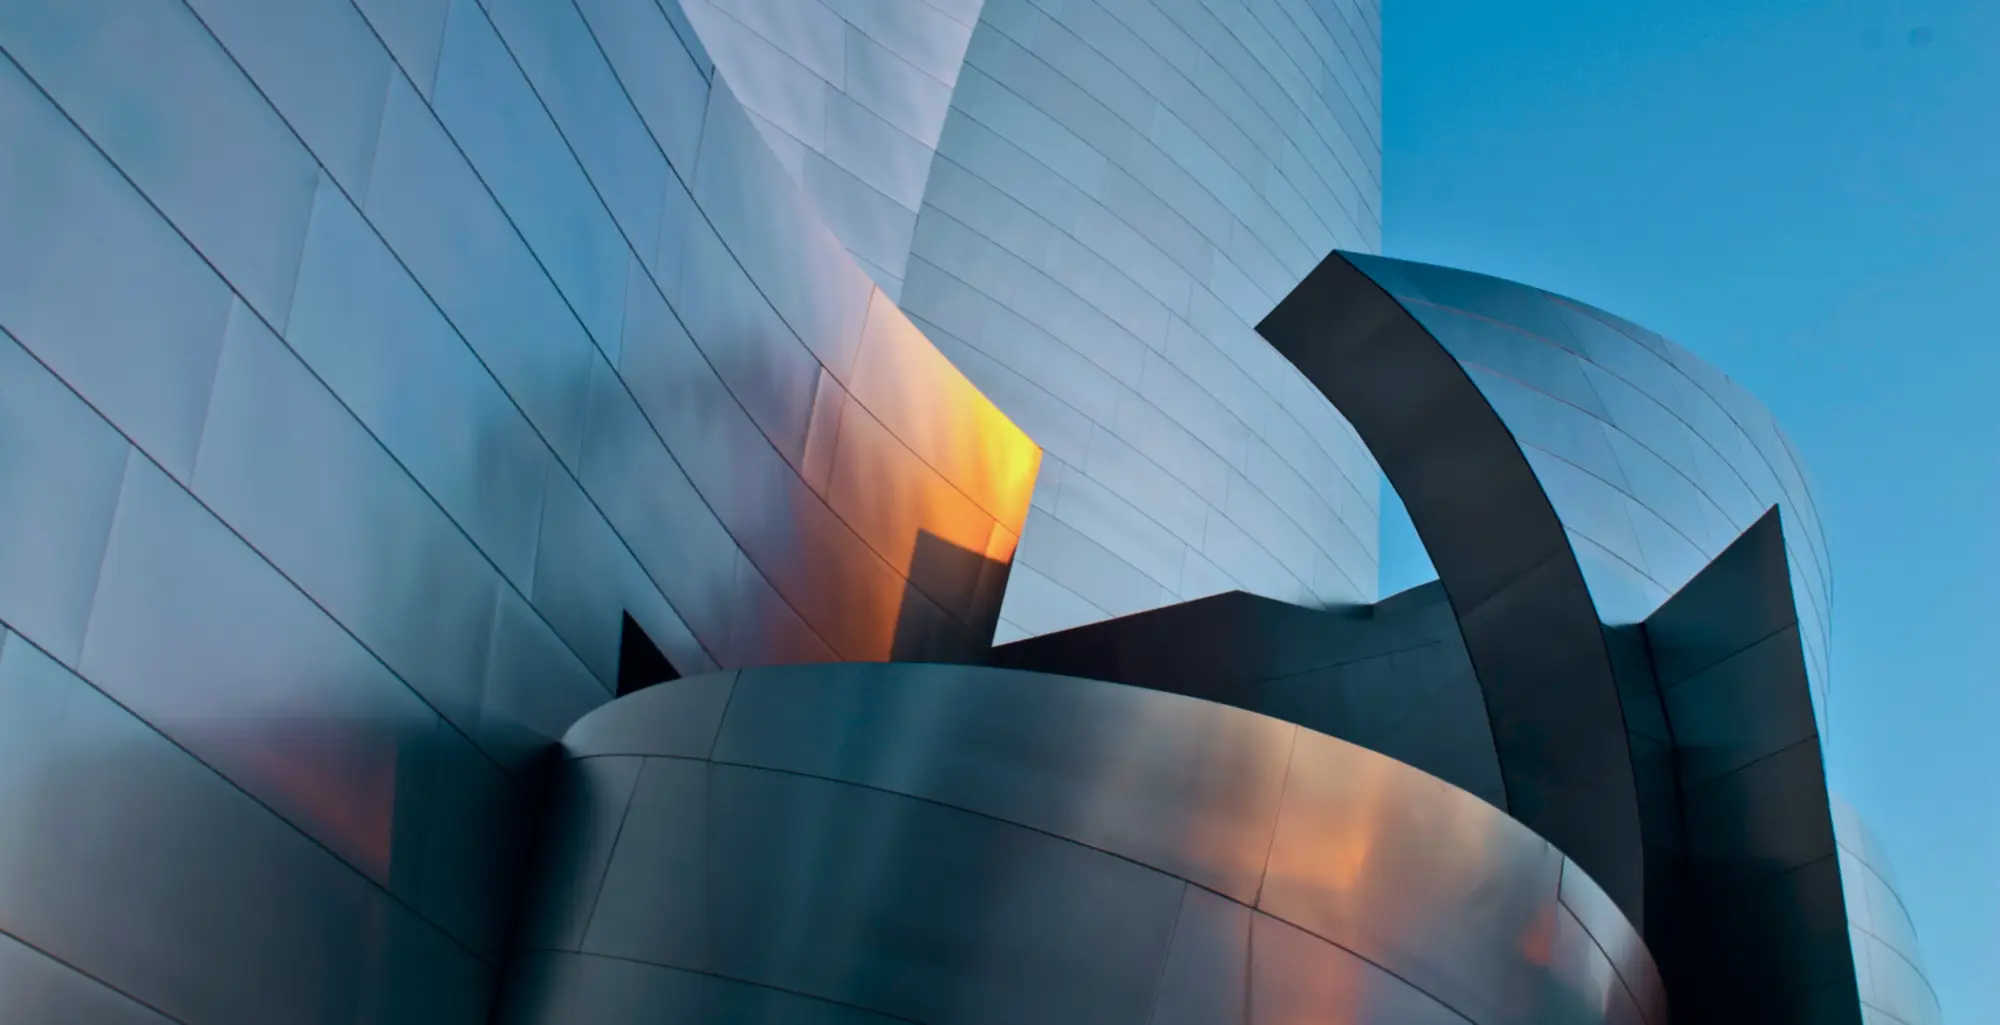 An exterior view of Walt Disney Concert Hall showing the building's complex curves and metal surface reflecting the bright blue sky above it.